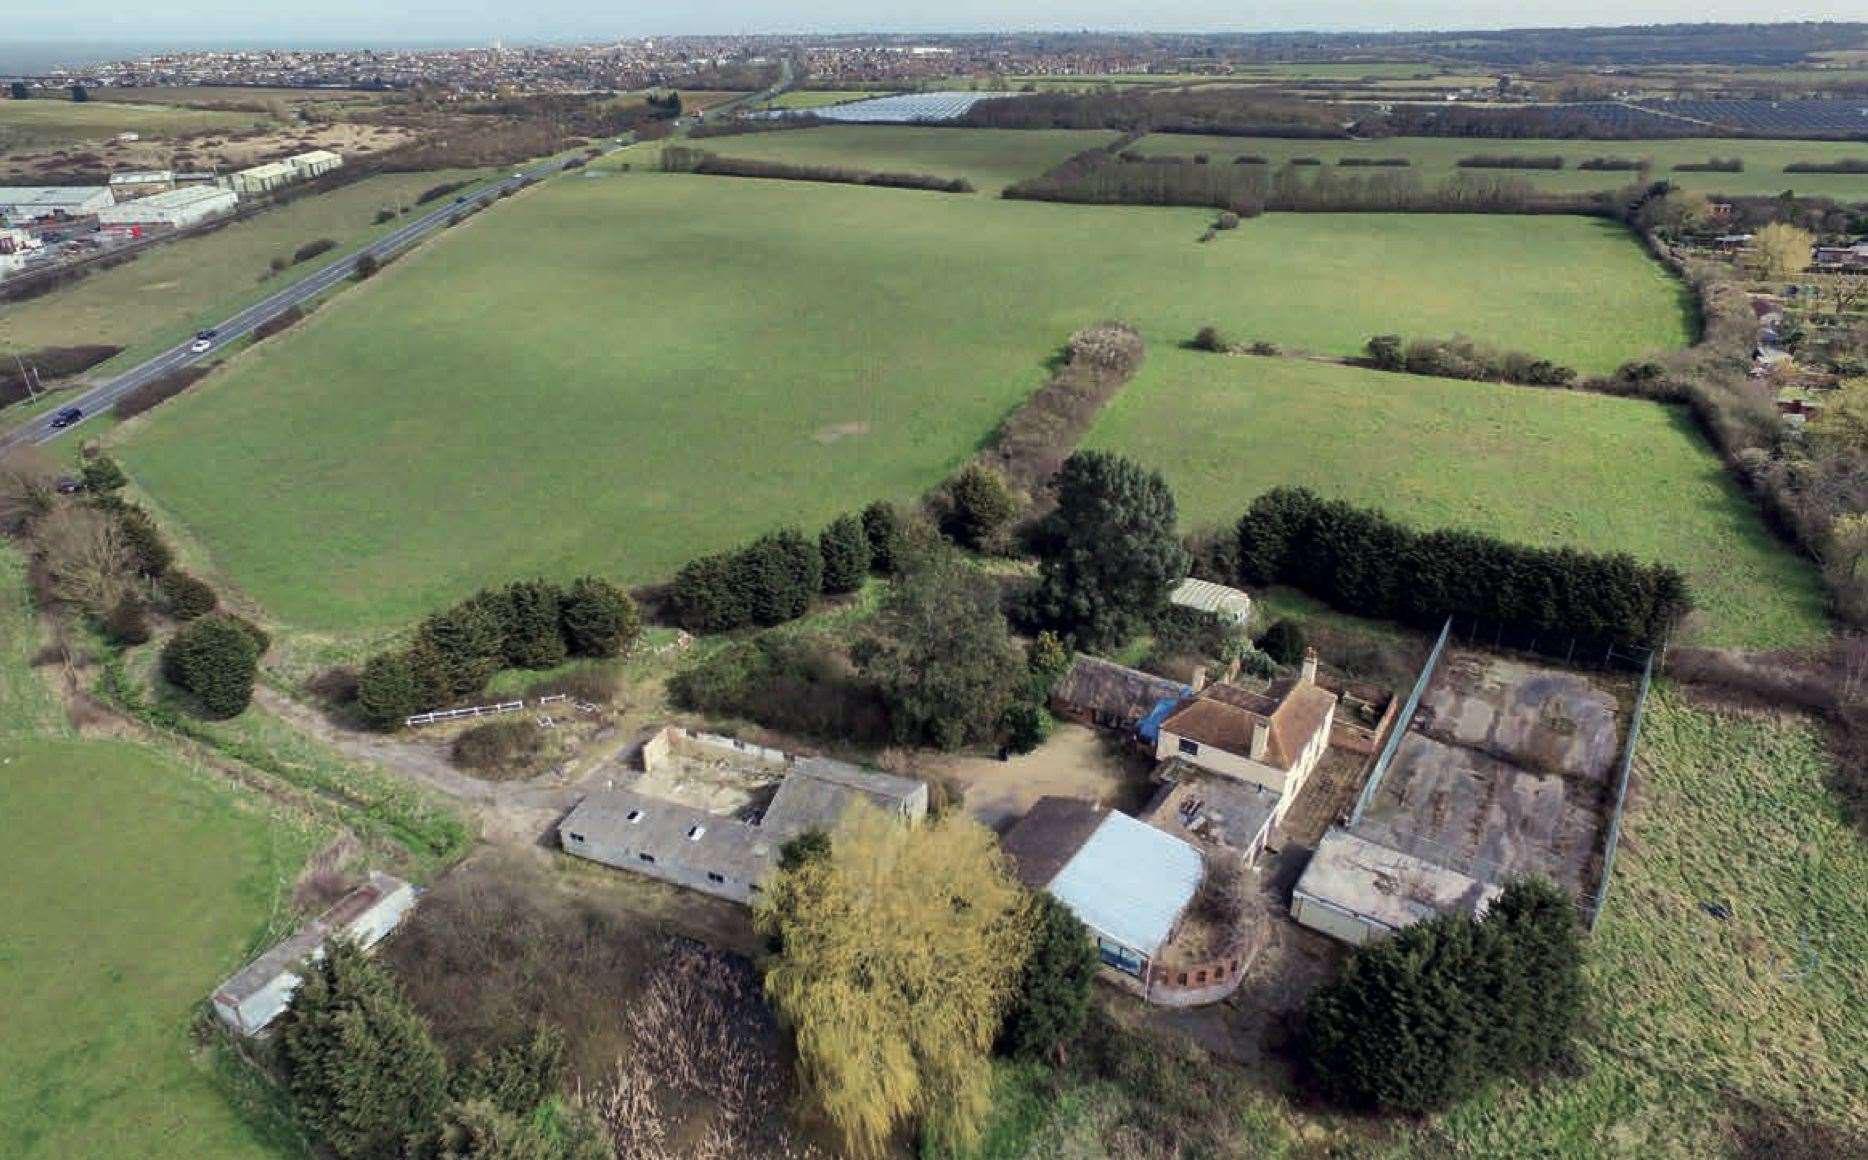 Bodkin Farm had its listed status taken away in 2018, and has been left to rack and ruin. Picture: Strutt & Parker